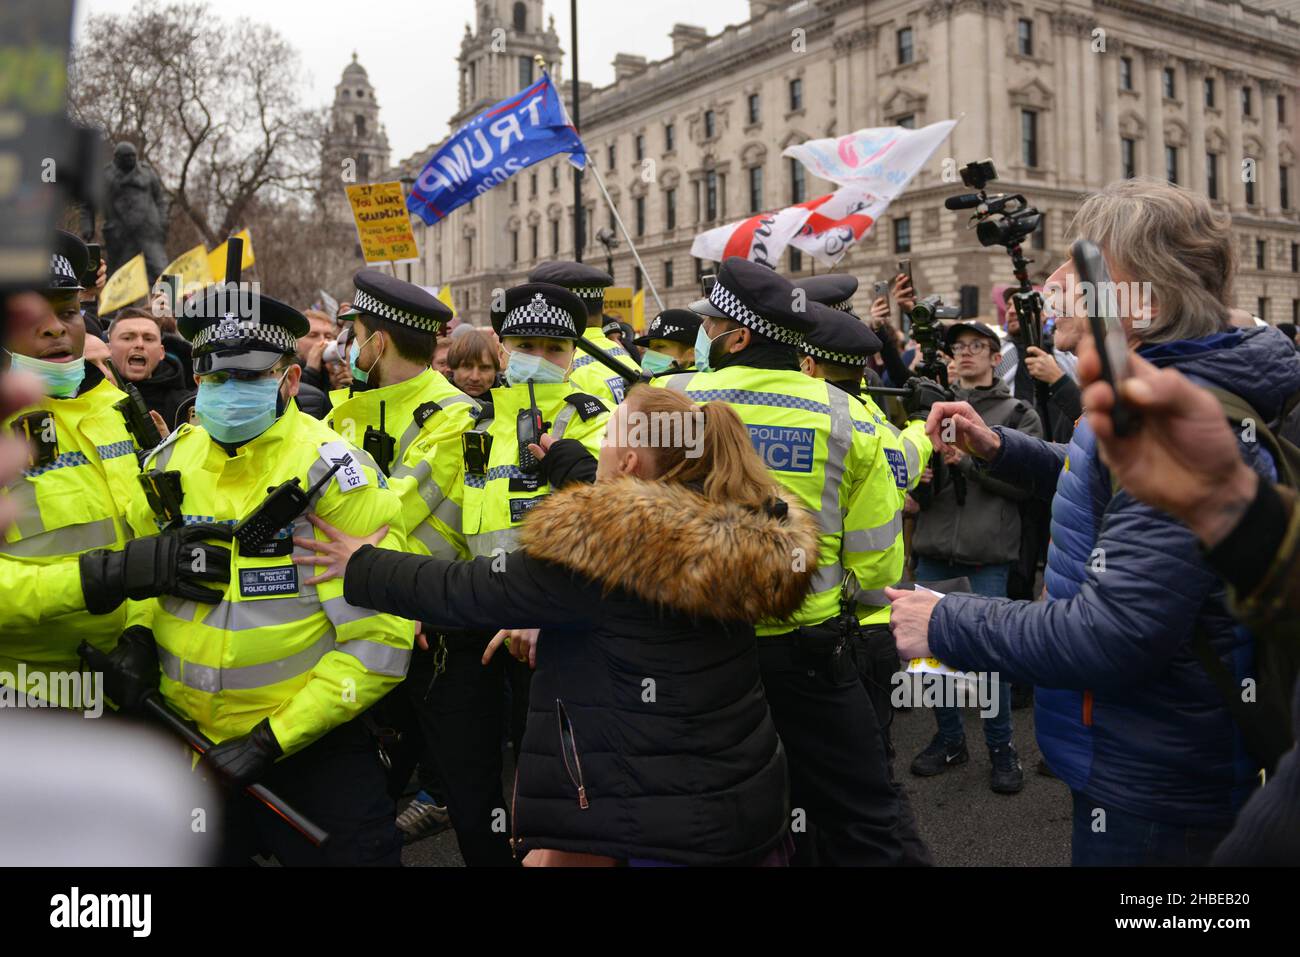 Police scuffling with protesters trying to prevent a blockade of the street, during the demonstration. Anti vaccine and anti vaccine pass protesters joined by opponents of Covid 19 restrictions, gathered at Parliament Square and marched through central London. Stock Photo